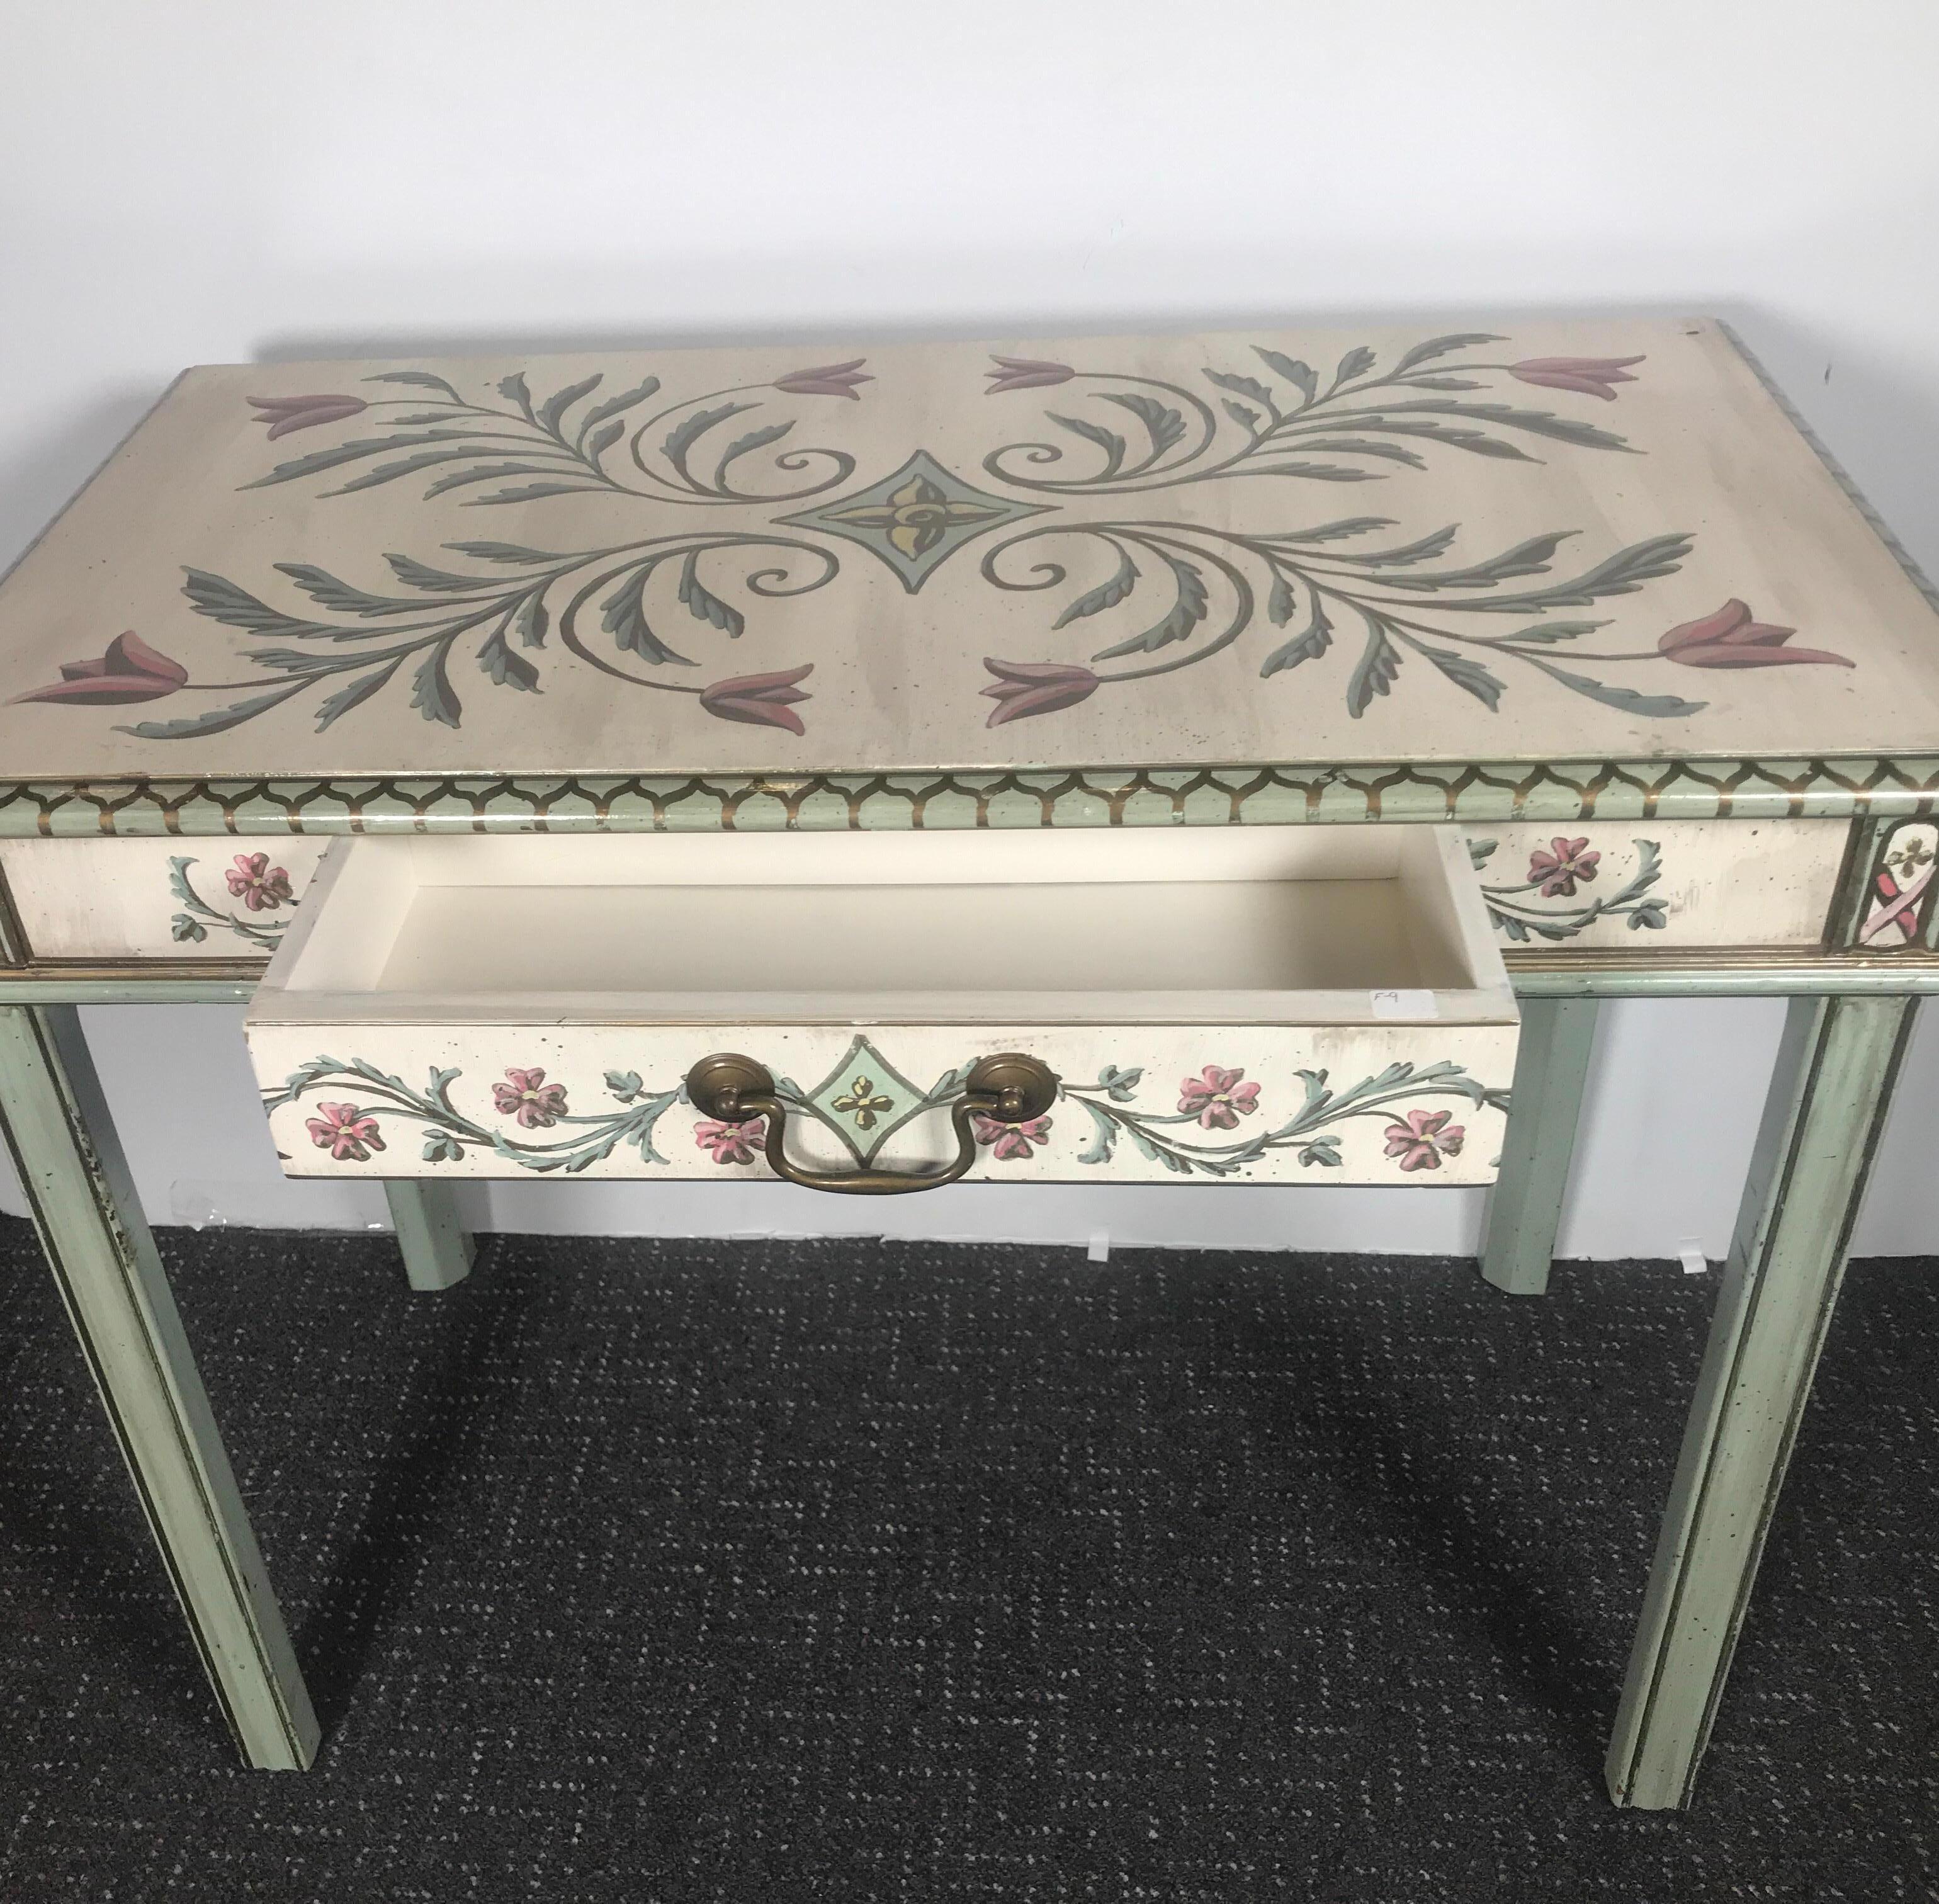 A beautifully hand painted table vanity desk with off-white background with scrolling and floral details. The simple form with one drawer.